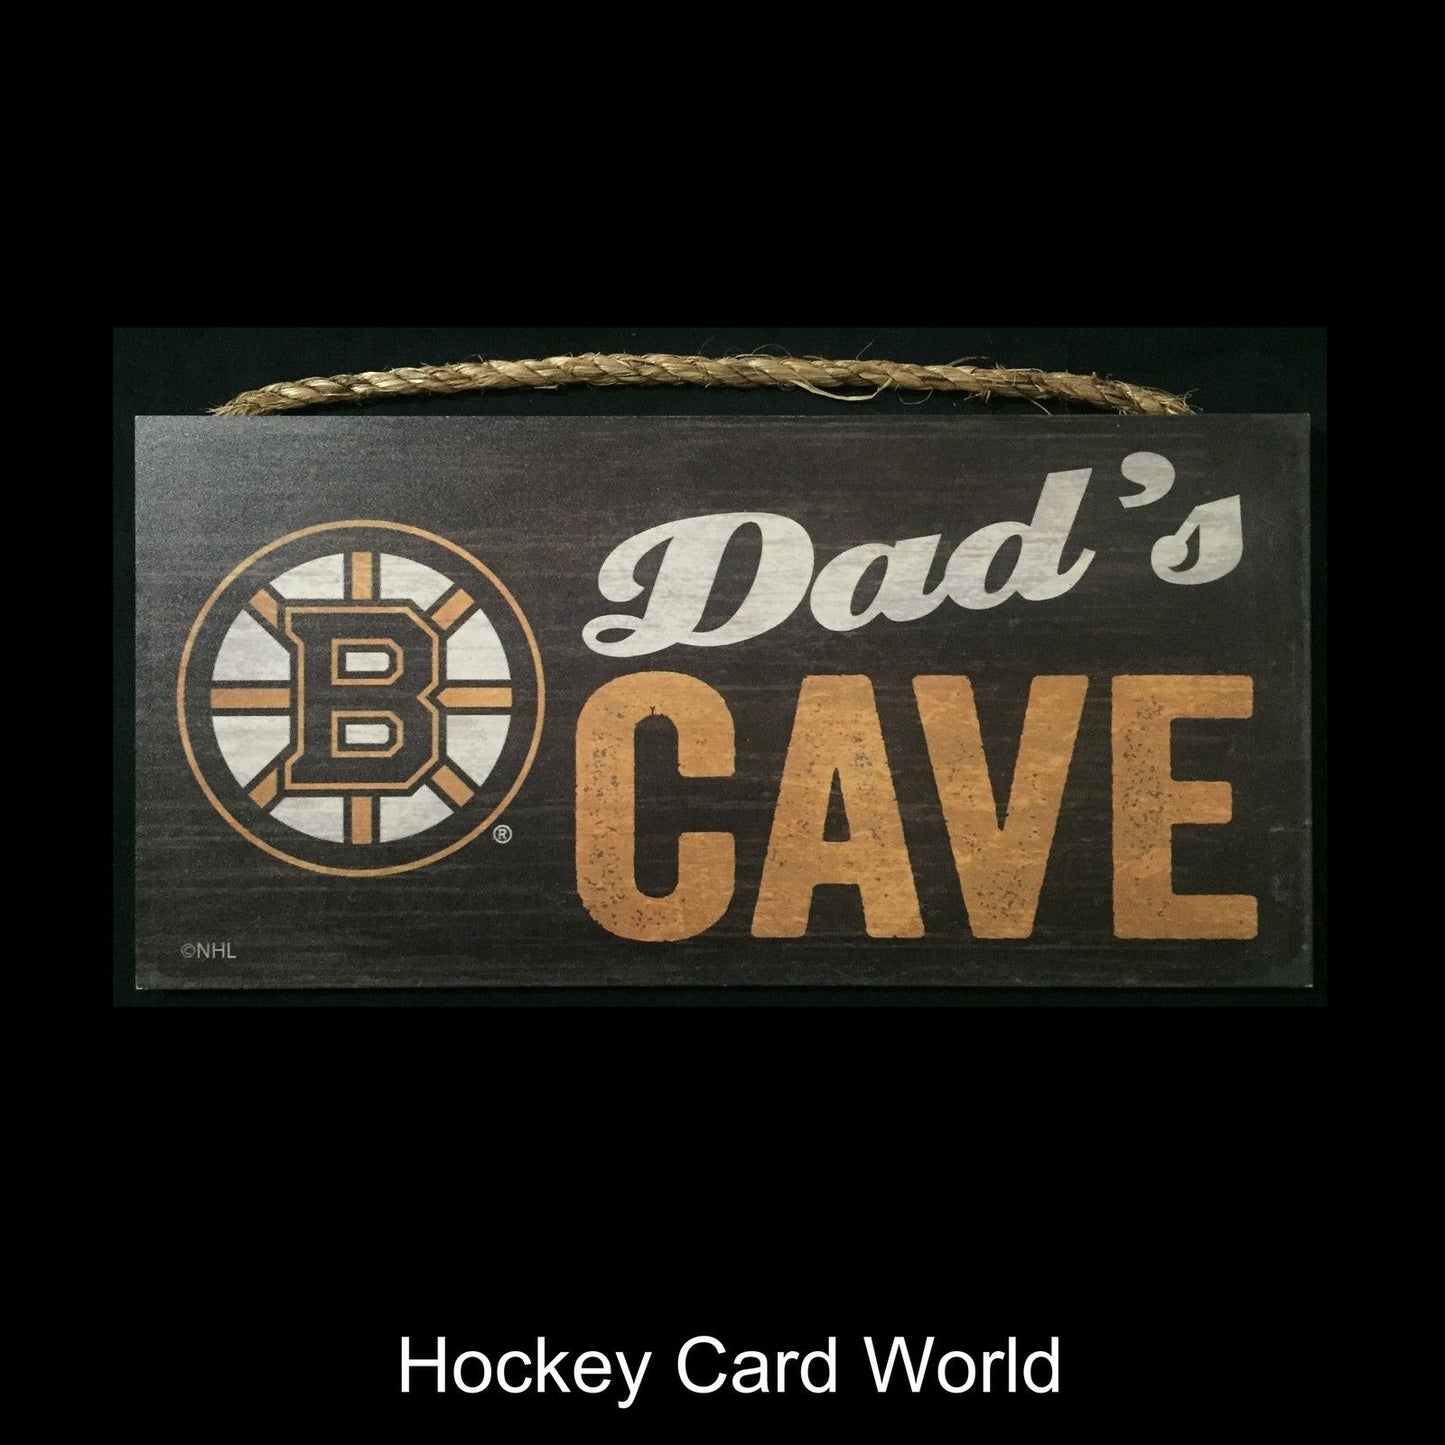 Boston Bruins 6" x 12" Wooden "Dads Cave" Sign NHL Official Licensed